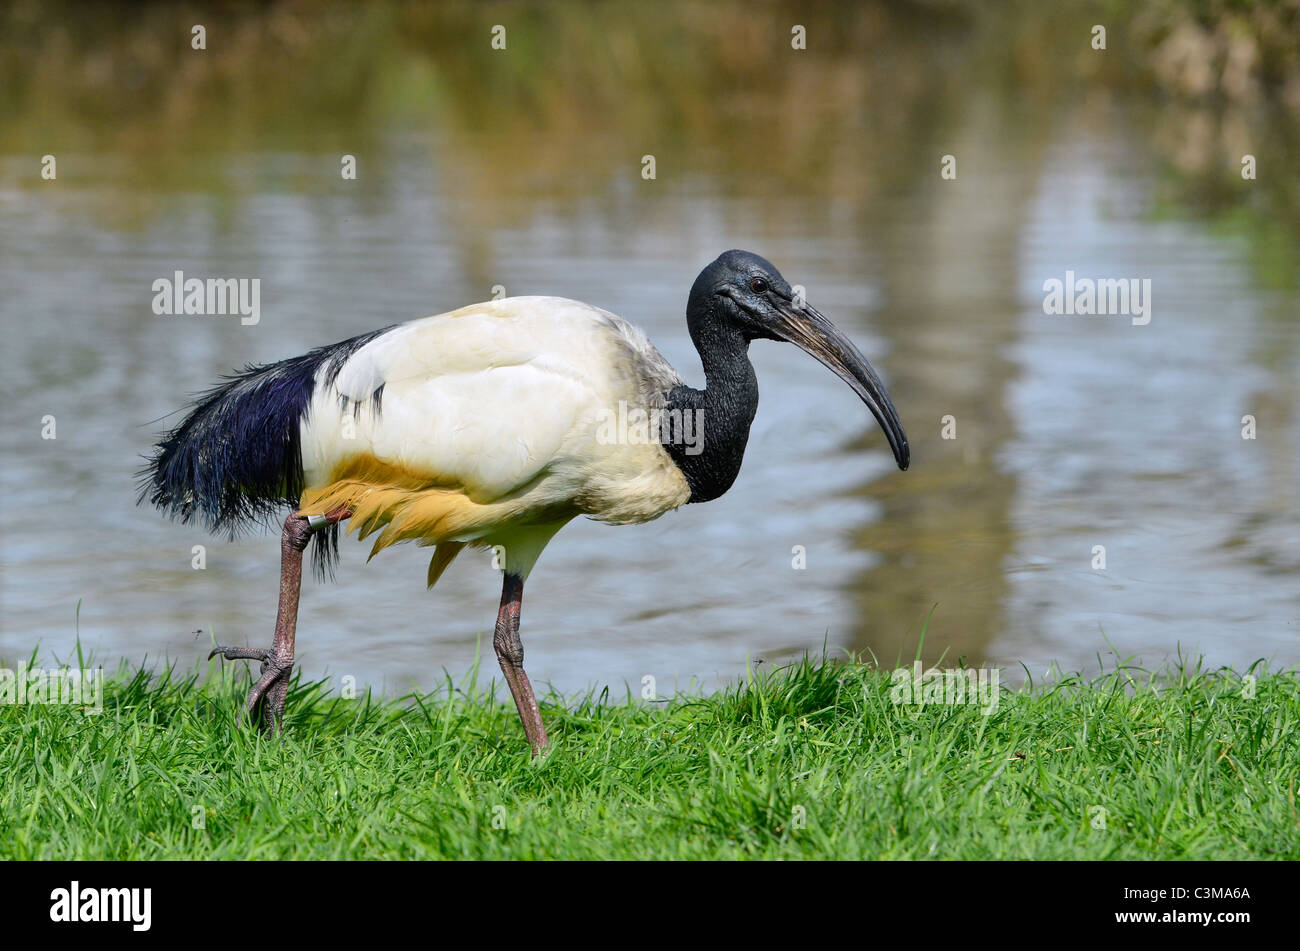 African sacred ibis (Threskiornis aethiopicus), view of profile, walking on grass on the bank of pond Stock Photo